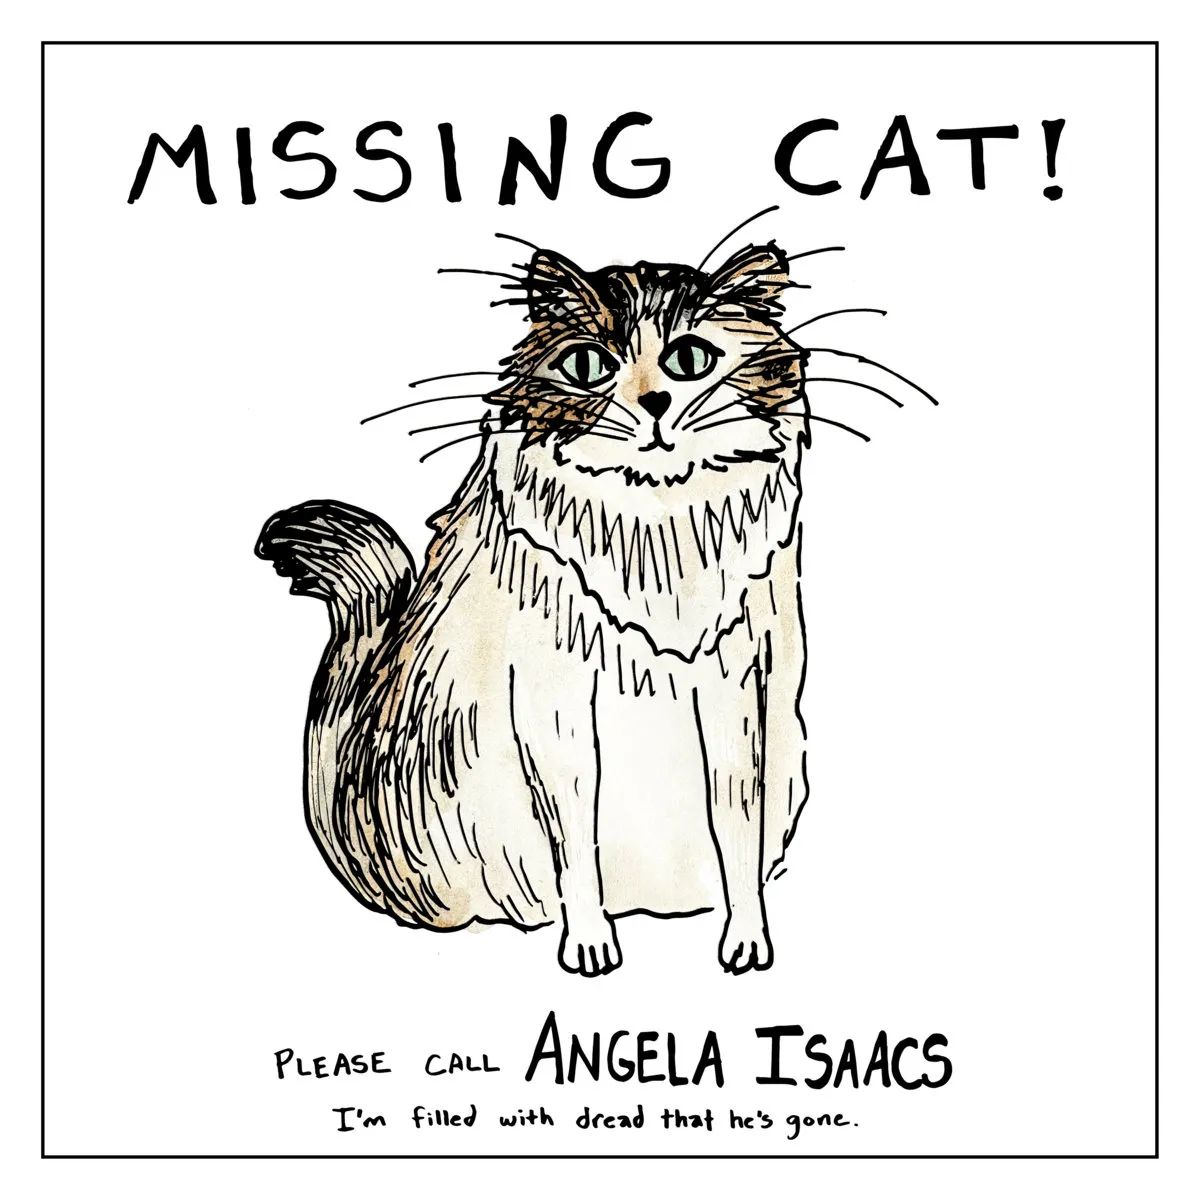 Missing Cat! is a humble collection of songs rooted in classic acoustic sound. Angela Isaacs doesn’t ask for publicity, but for listeners with a hefty vulnerability.